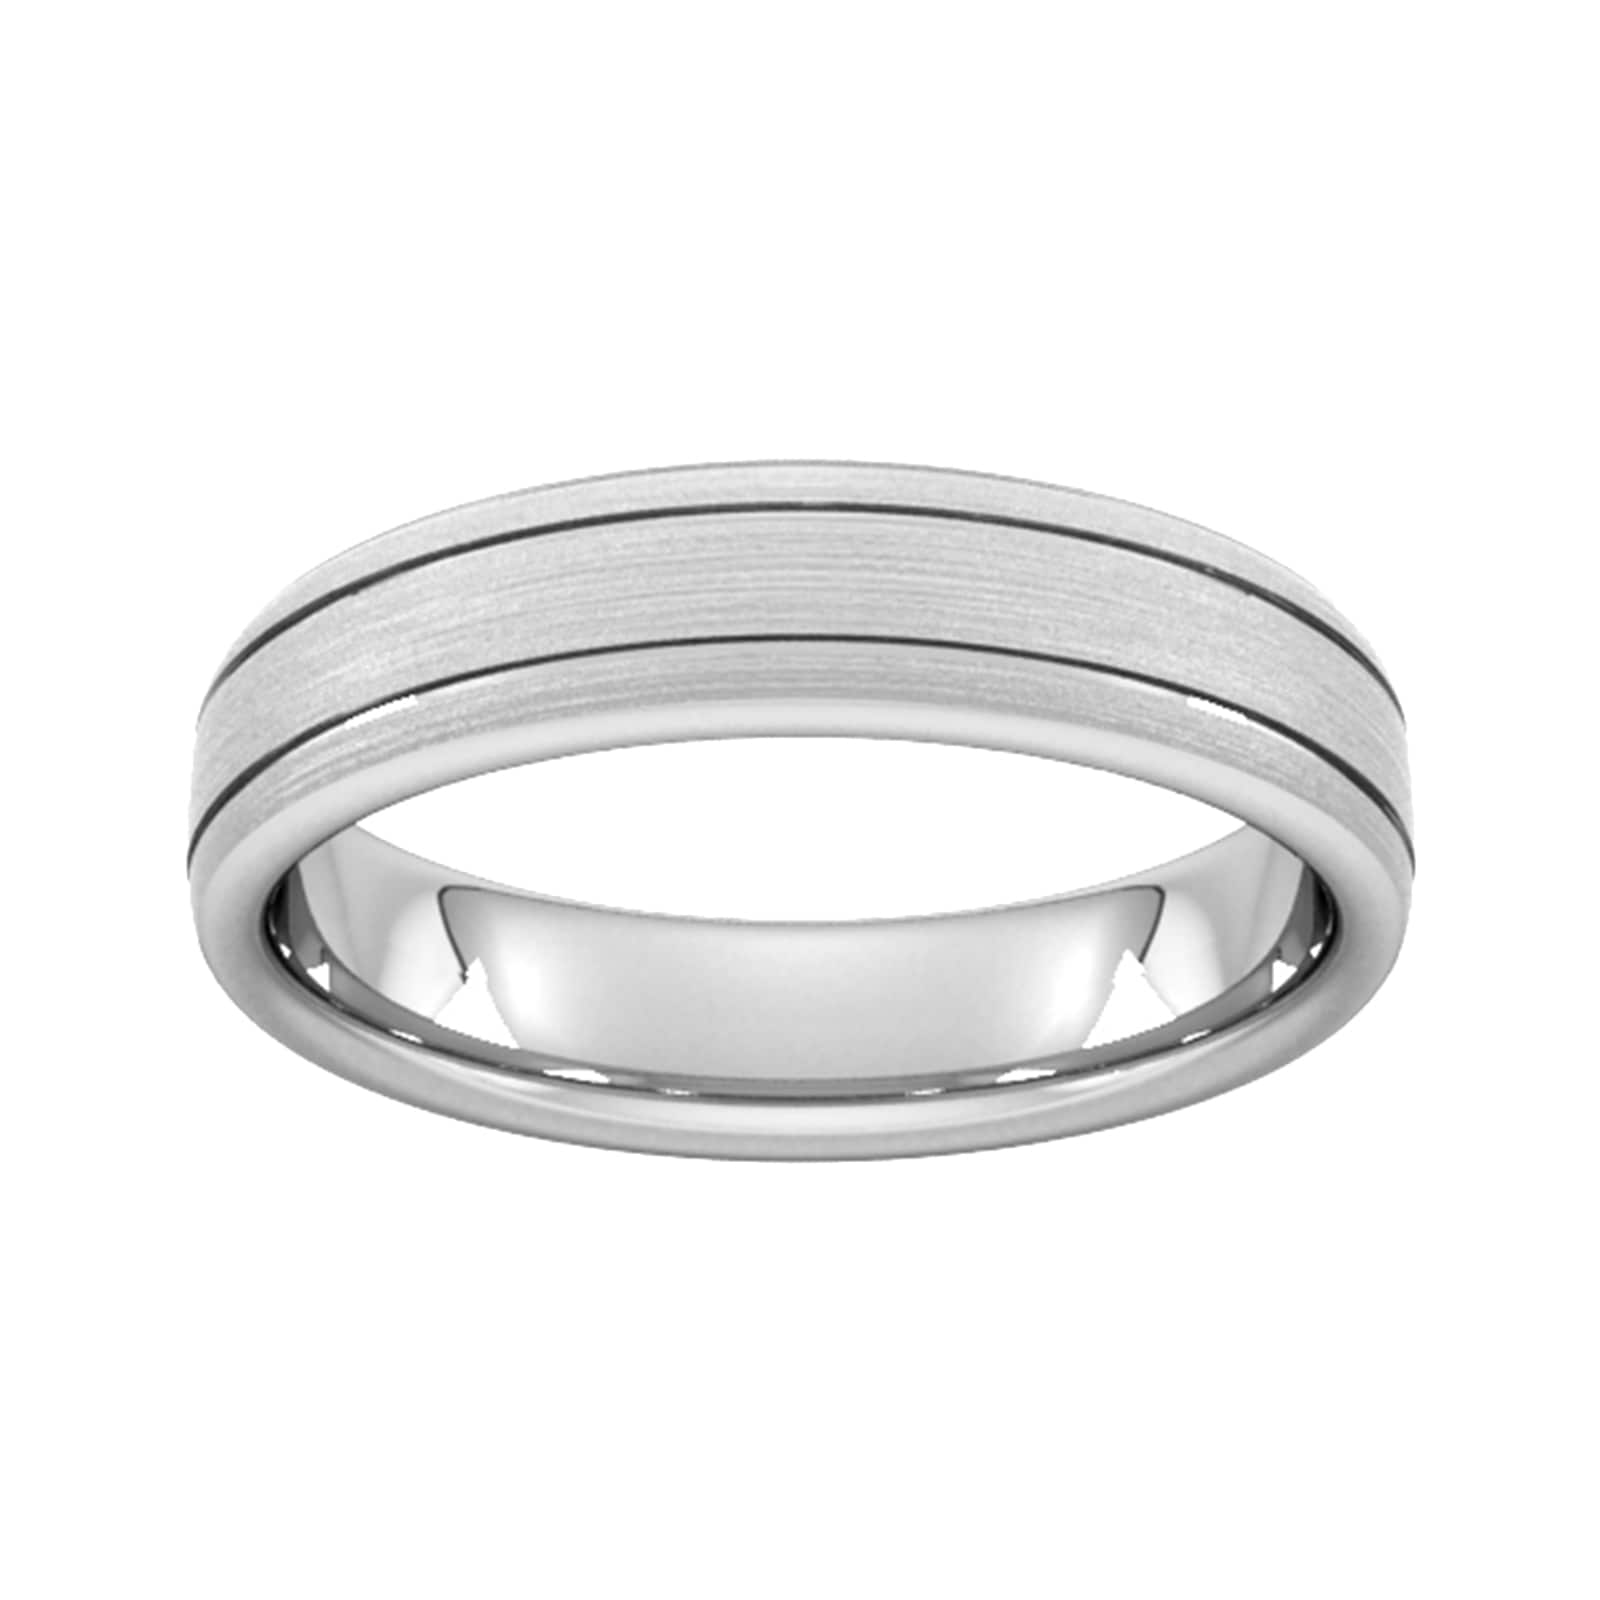 5mm Flat Court Heavy Matt Finish With Double Grooves Wedding Ring In 950 Palladium - Ring Size R